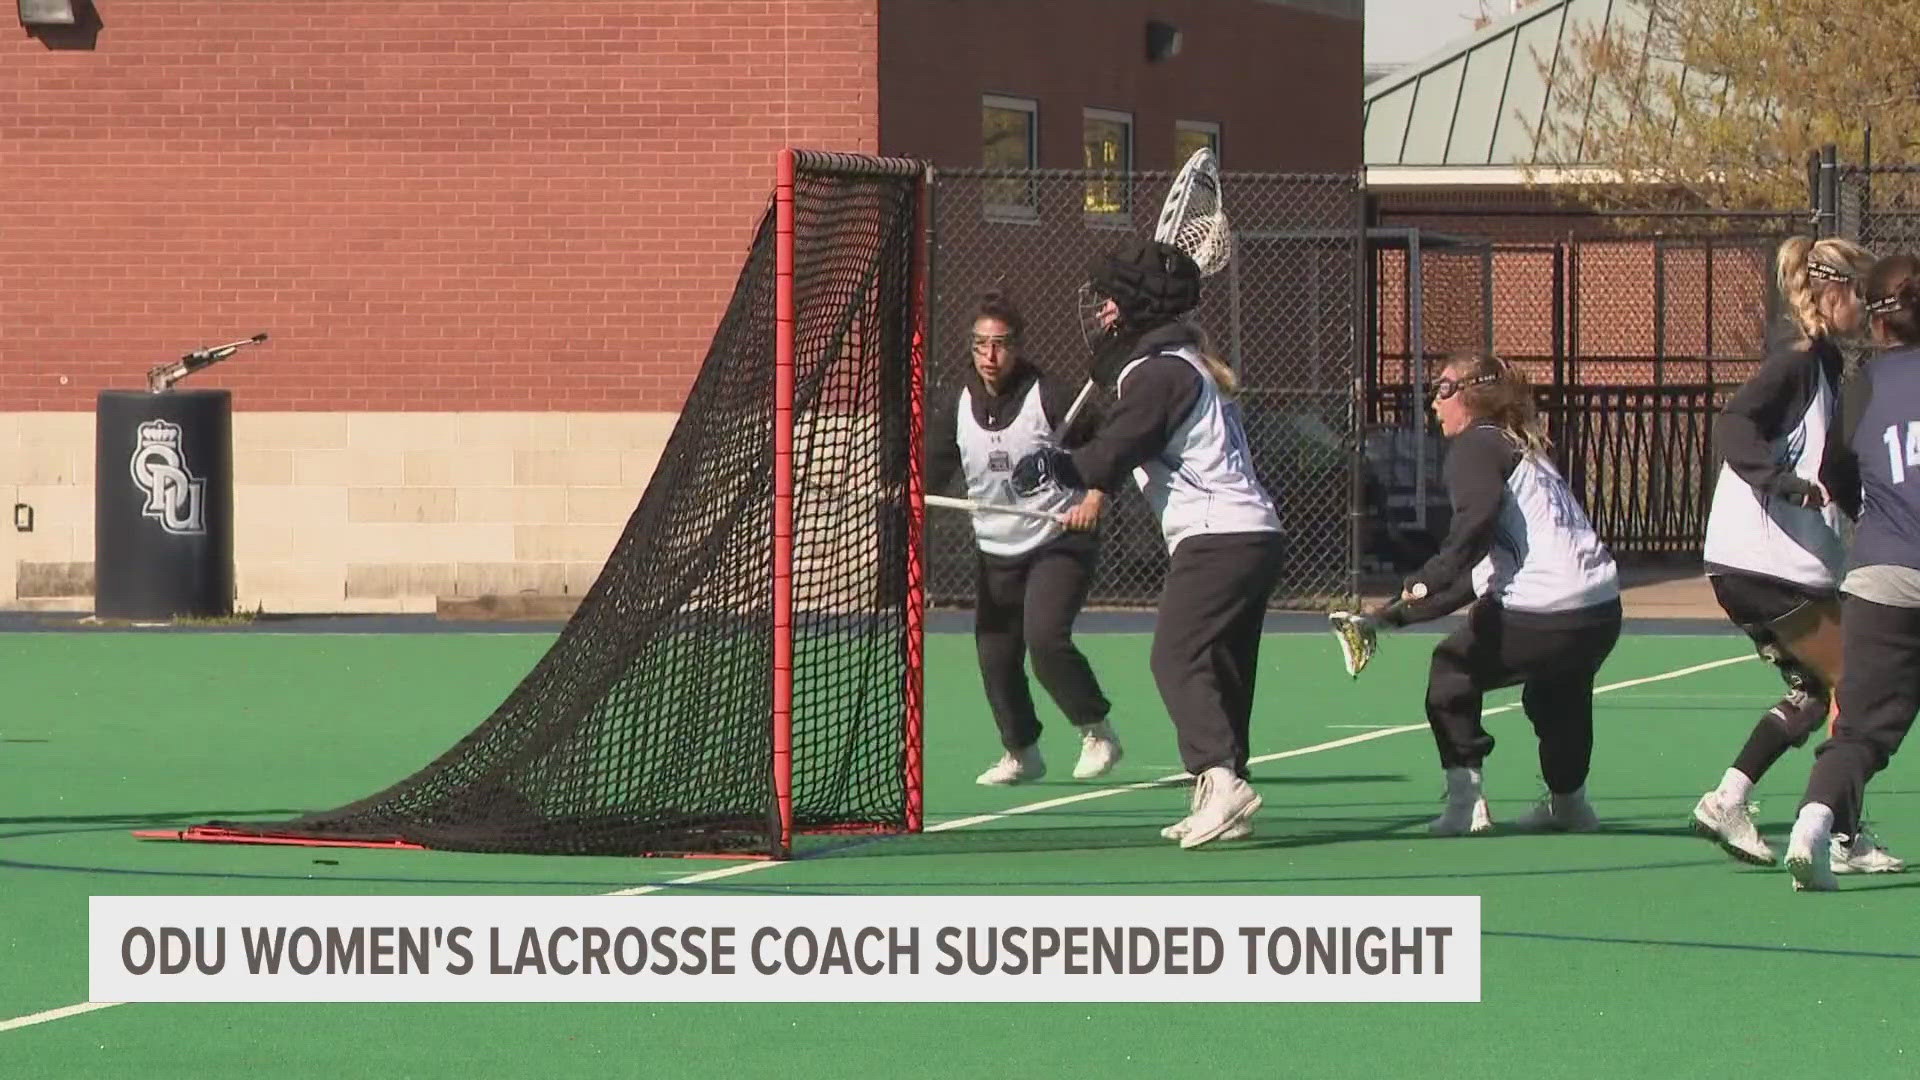 Assistant Athletic Director says Walton could not participate in today’s lacrosse game against James Madison University because of the suspension.